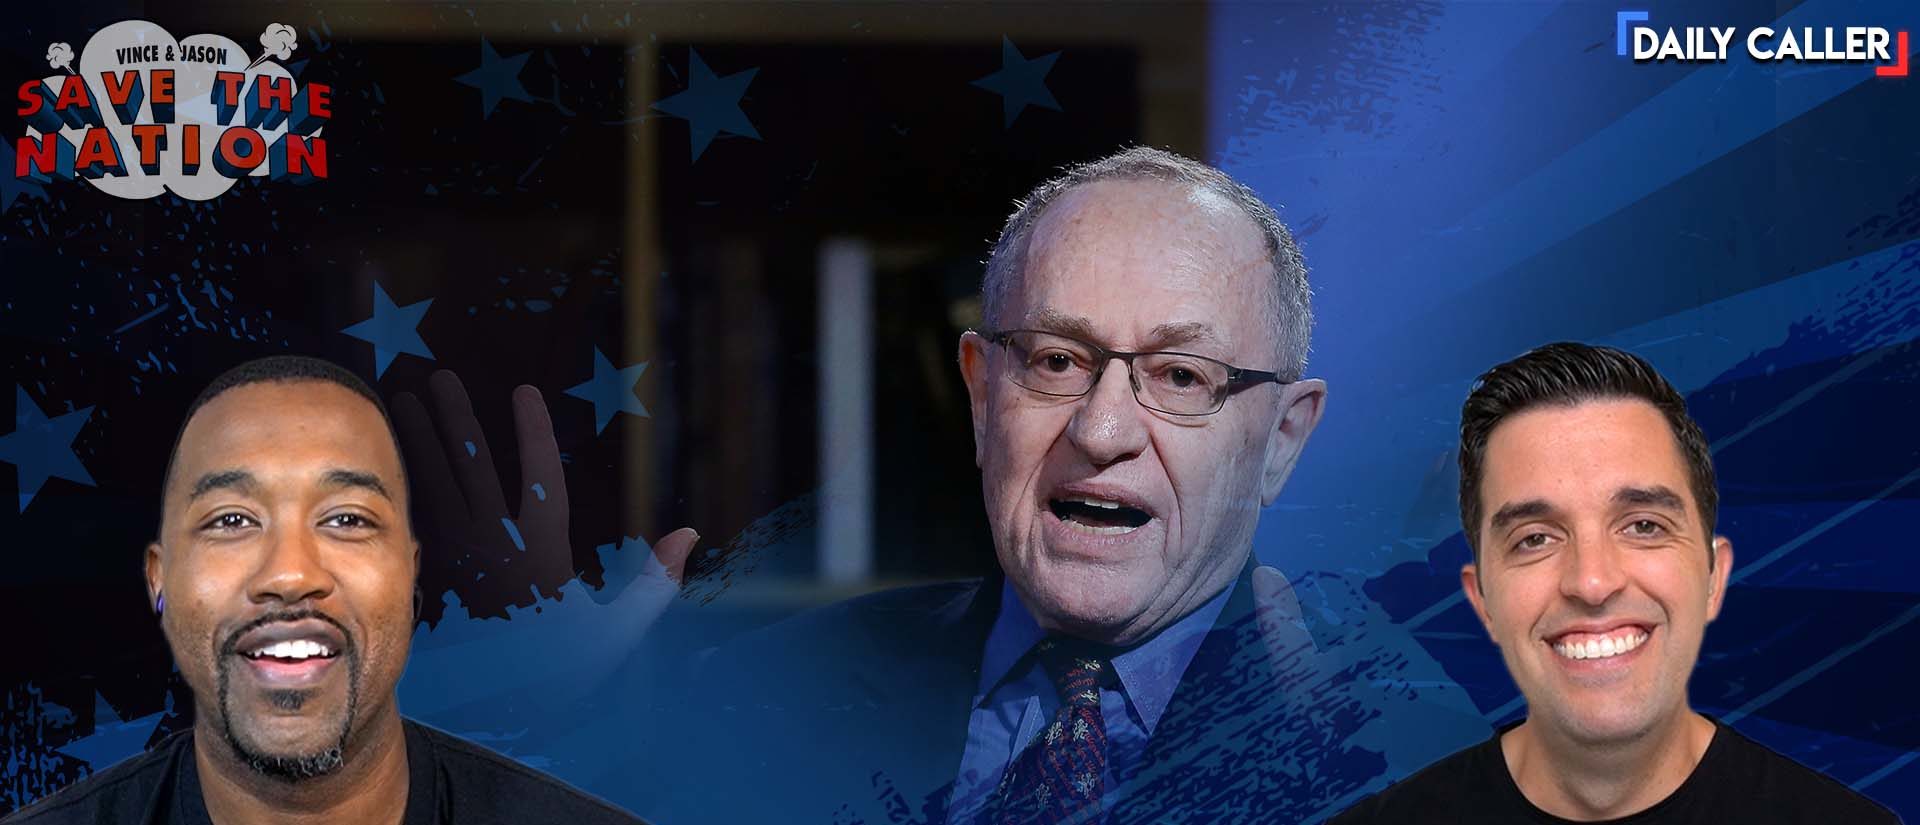 Jeffrey Epstein, Vaccine Mandates And Roe V. Wade With Alan Dershowitz | Vince & Jason Save The Nation